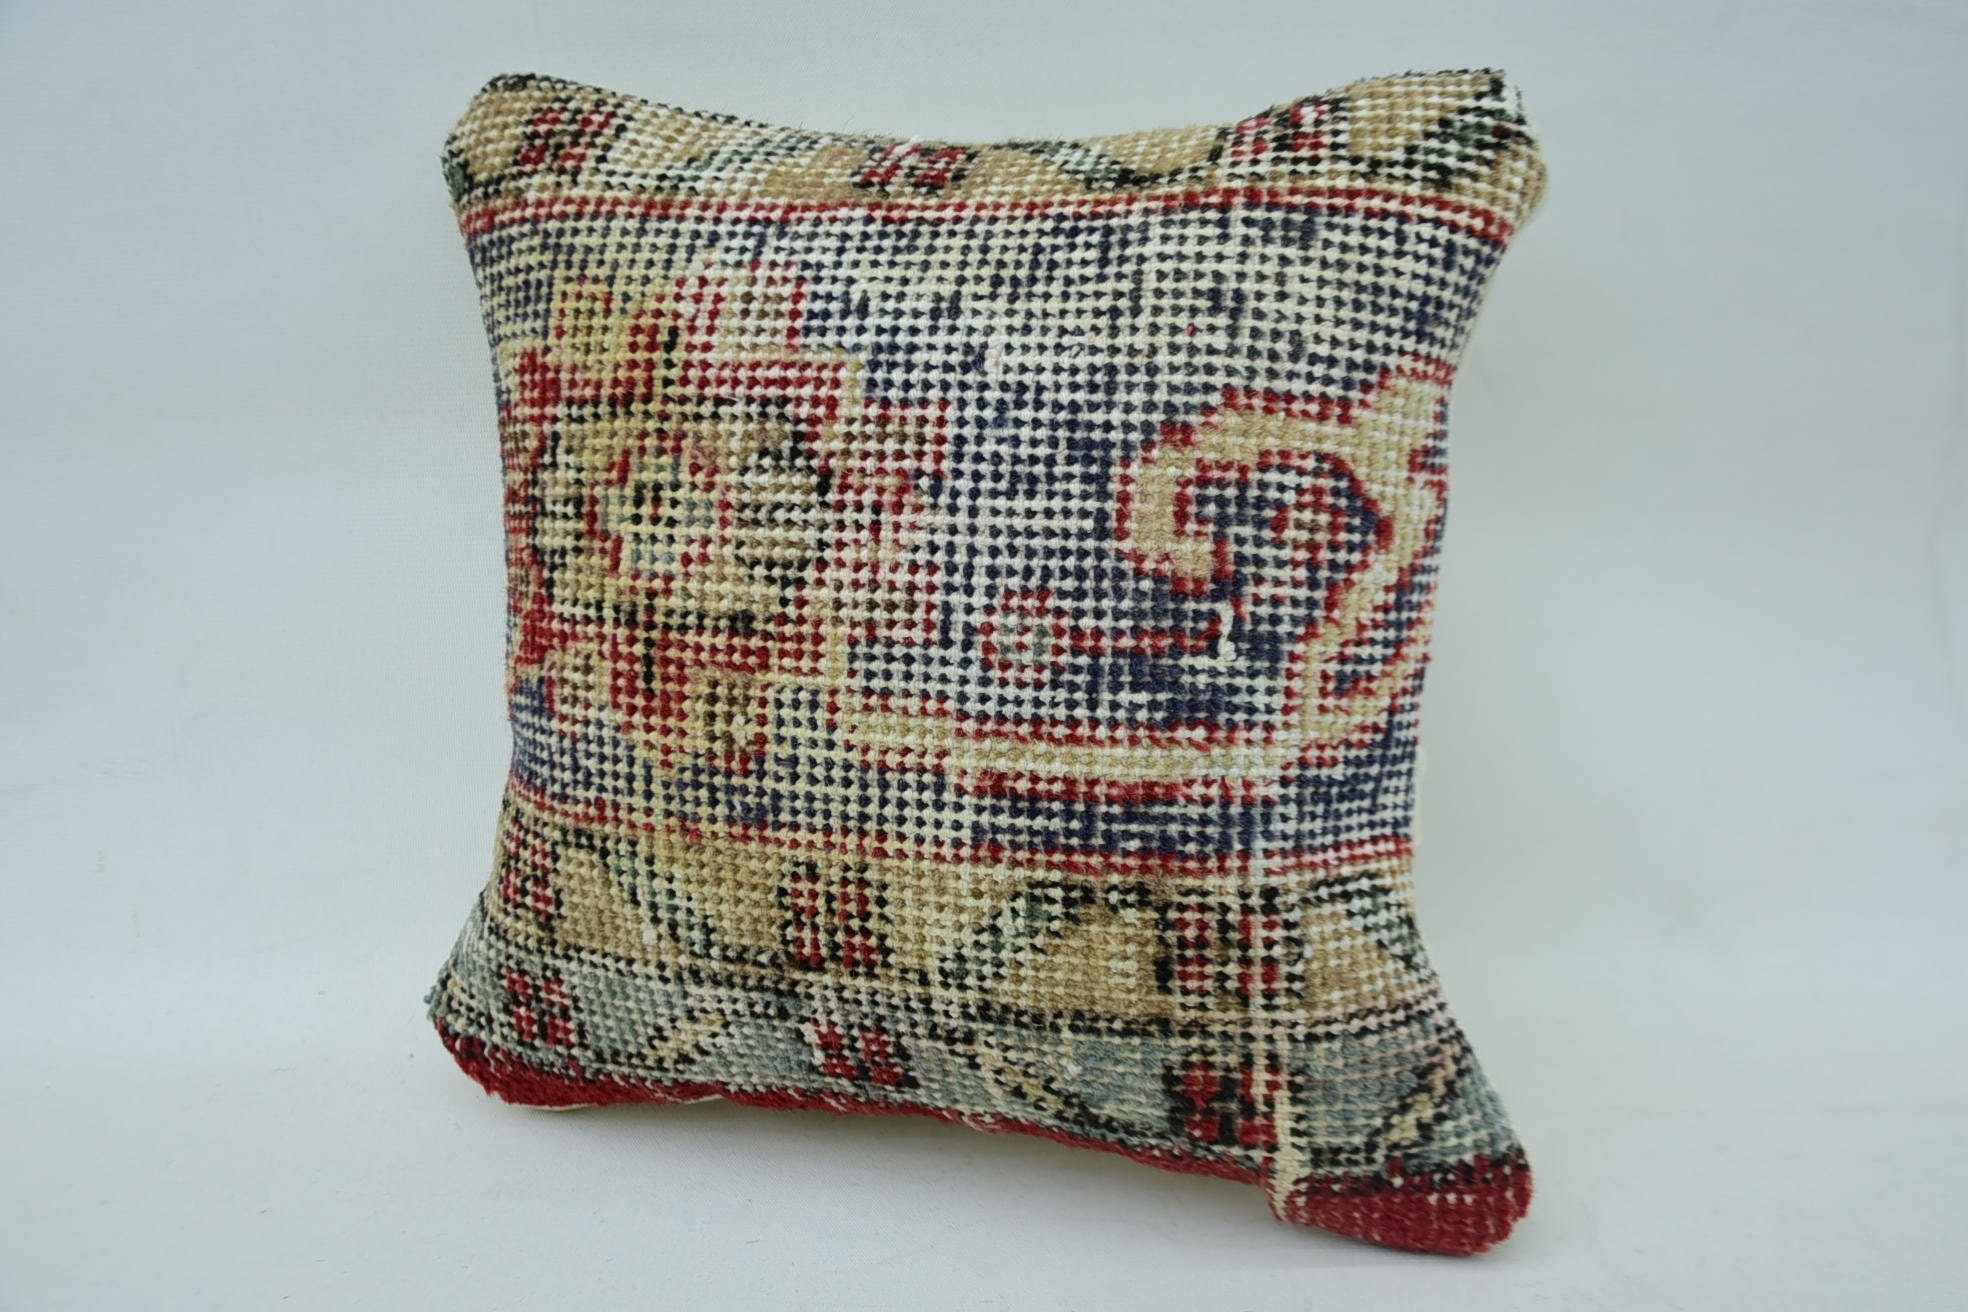 Ethnical Kilim Rug Pillow, Handmade Cushion Cover, 12"x12" Red Pillow Cover, Home Decor Pillow, Turkish Kilim Pillow